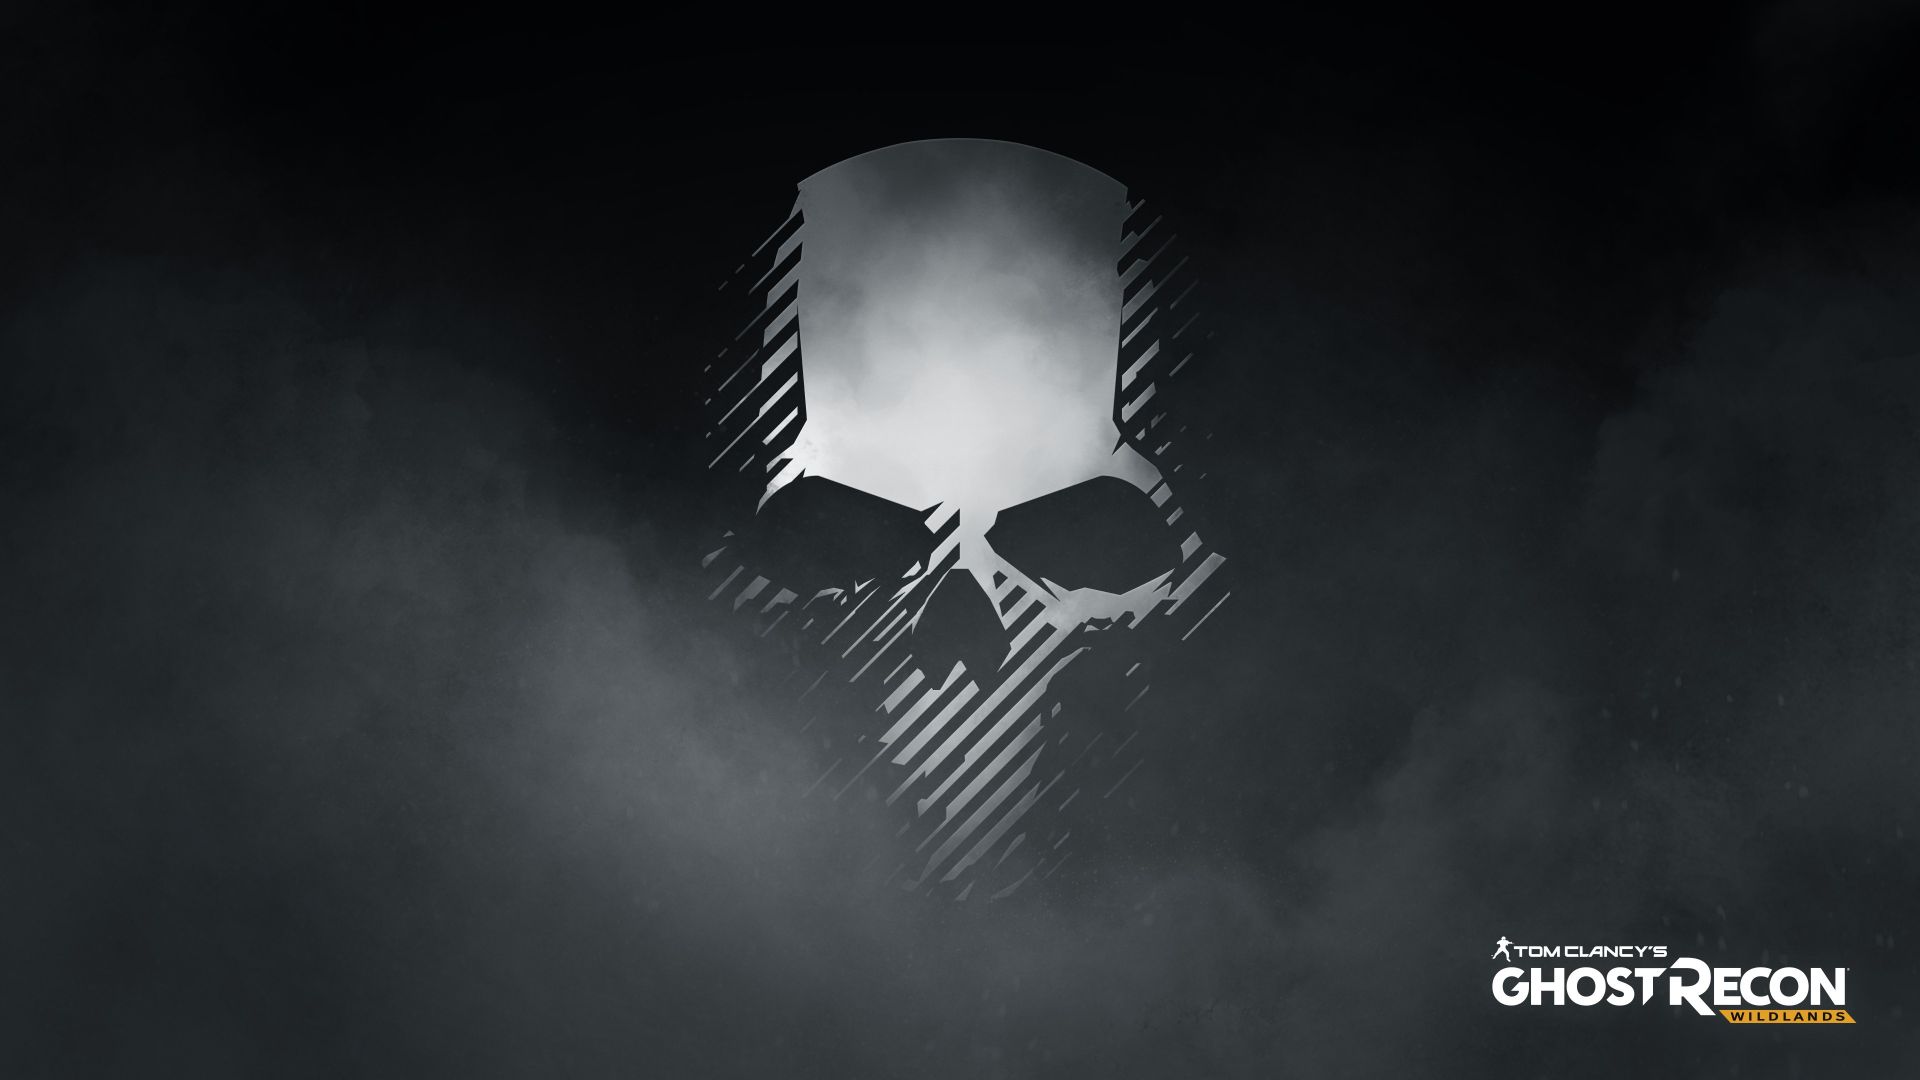 Desktop Wallpaper Tom Clancy's Ghost Recon: Wildlands Video Game, 2017 Game, Skull, HD Image, Picture, Background, Vycsfx